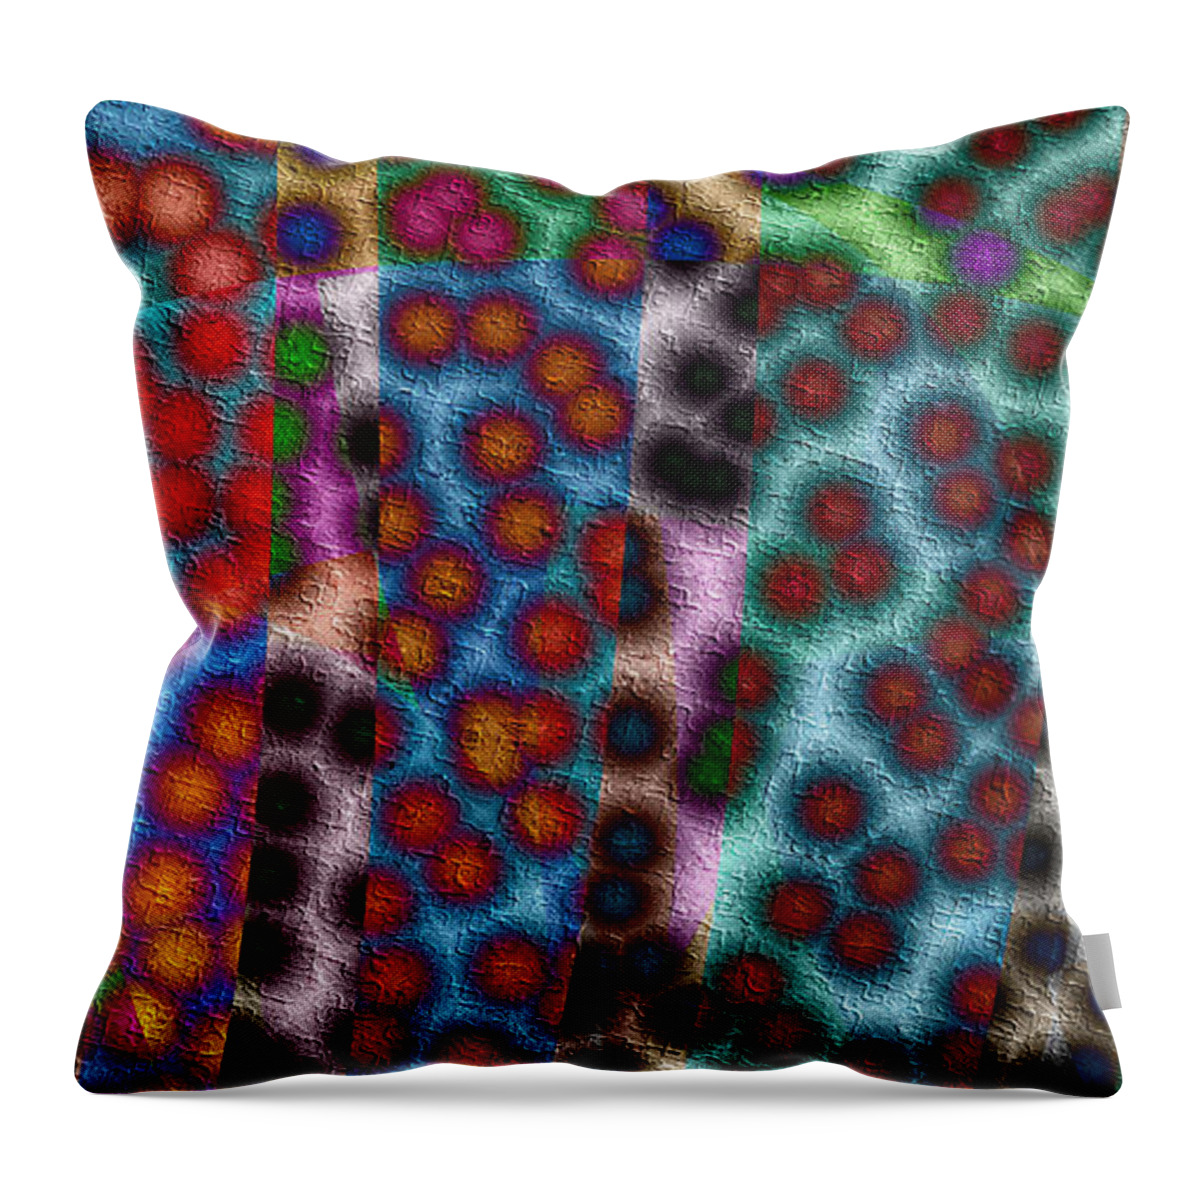 Fuzzy Microorganisims Throw Pillow featuring the digital art Fuzzy Microorganisims by Kiki Art